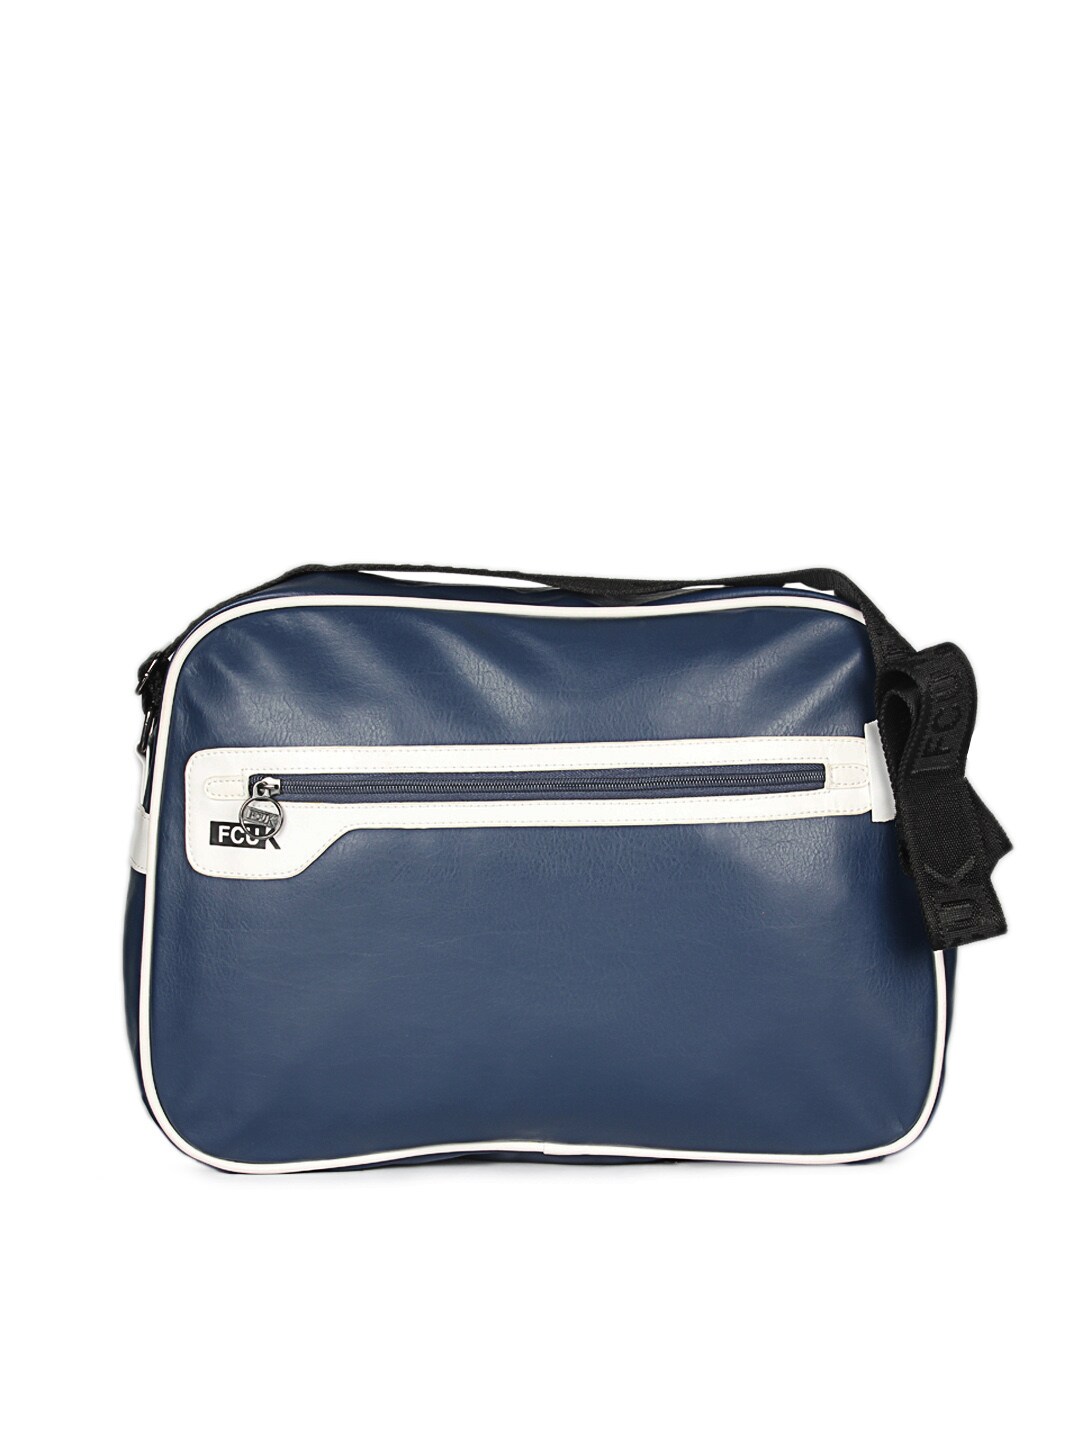 French Connection Unisex Blue Bag